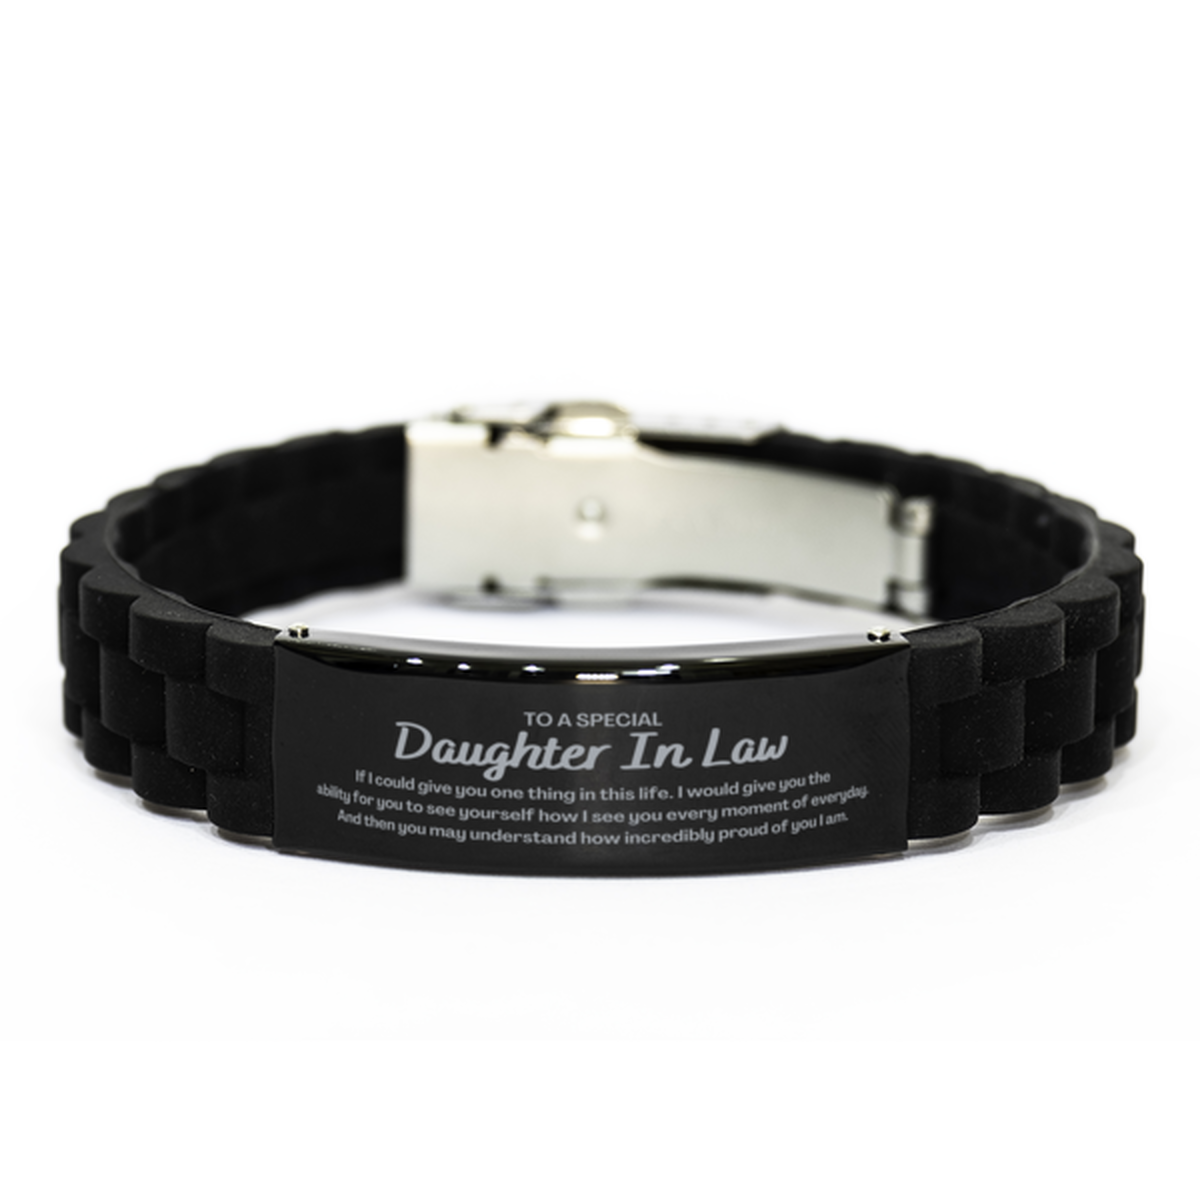 To My Daughter In Law Black Glidelock Clasp Bracelet, Gifts For Daughter In Law Engraved, Inspirational Gifts for Christmas Birthday, Epic Gifts for Daughter In Law To A Special Daughter In Law how incredibly proud of you I am